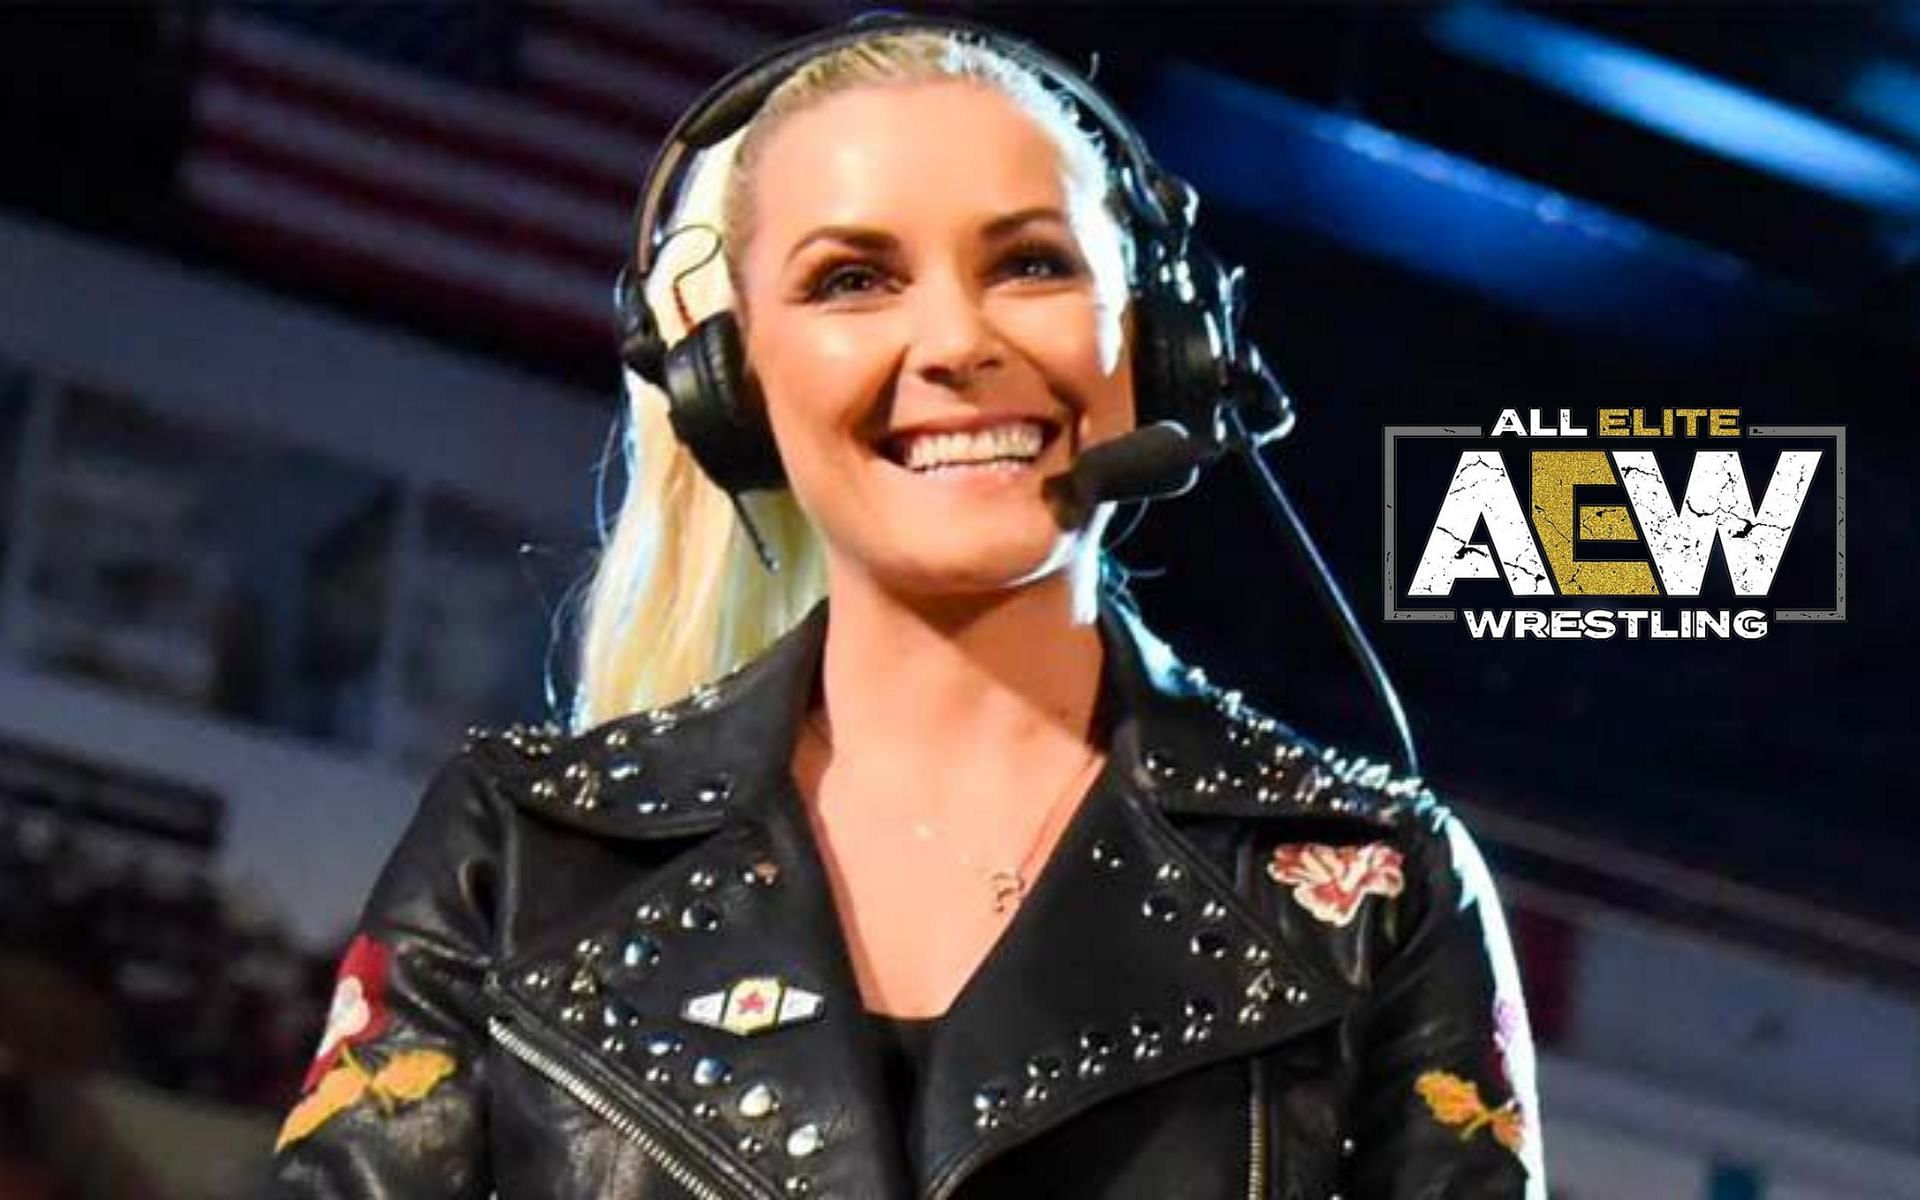 Renee Paquette tipped her hat to this AEW star during Dynamite.